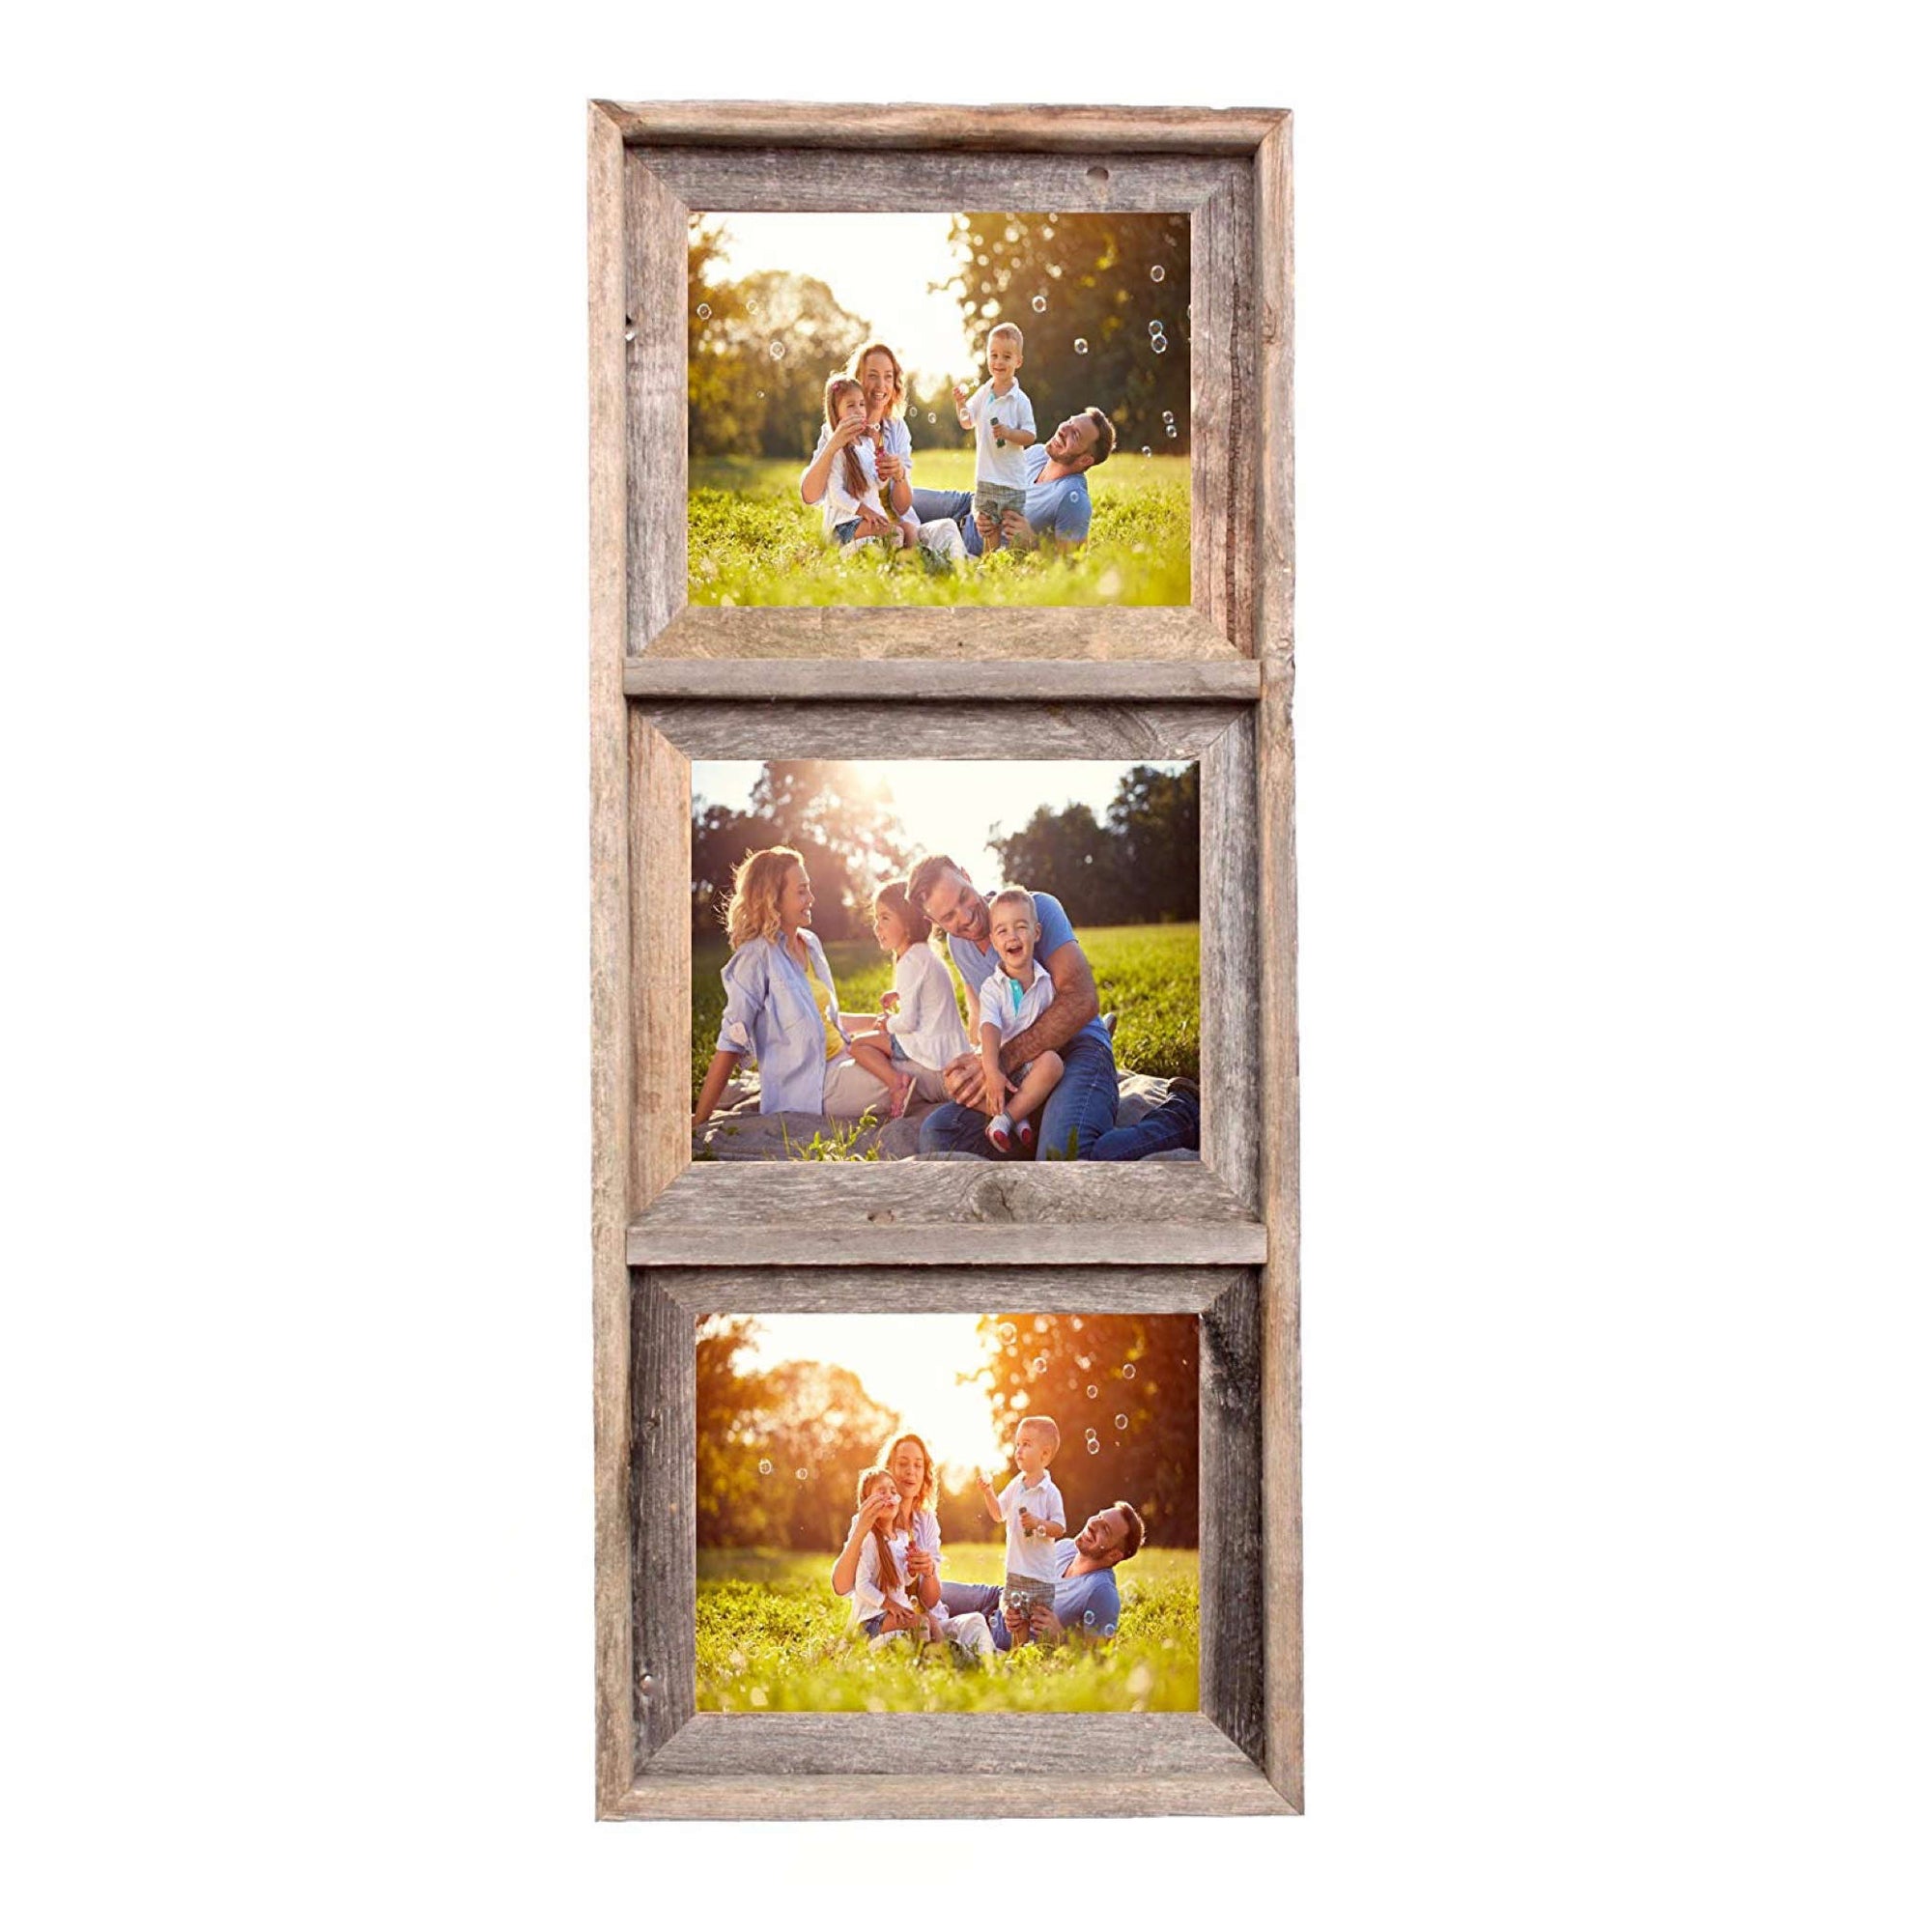 Complete Home 2 Opening Gallery Frame 4x6 - Each